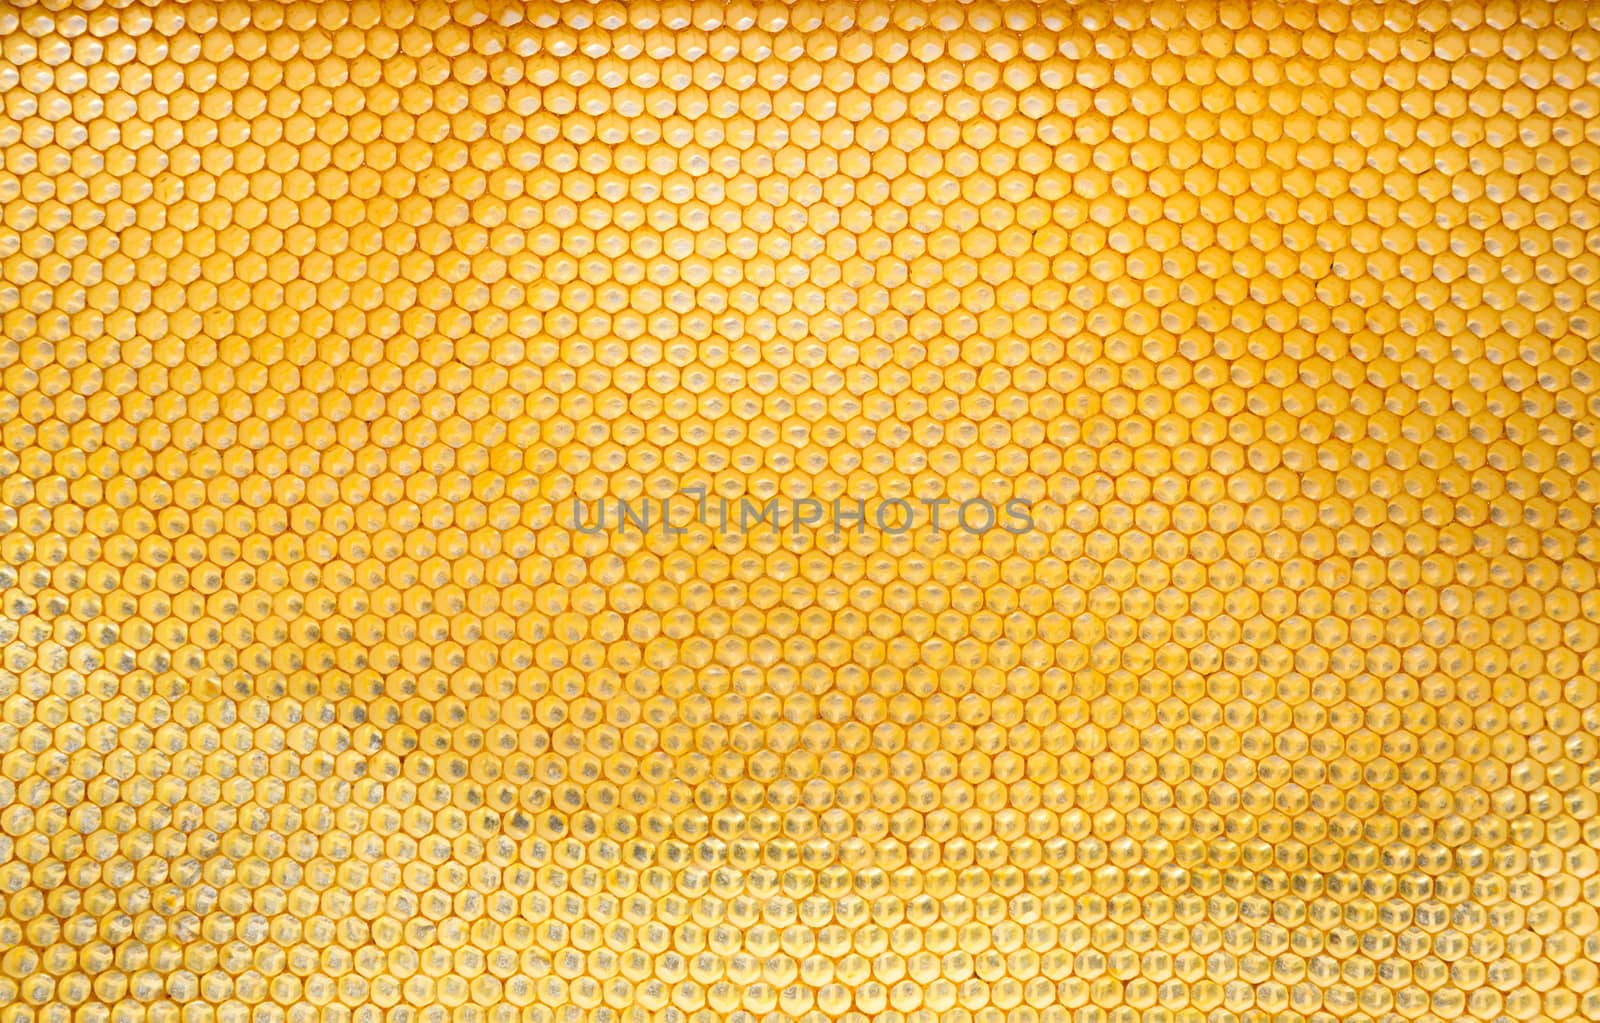 Pattern of hexangon honeycomb in a beehive without bees